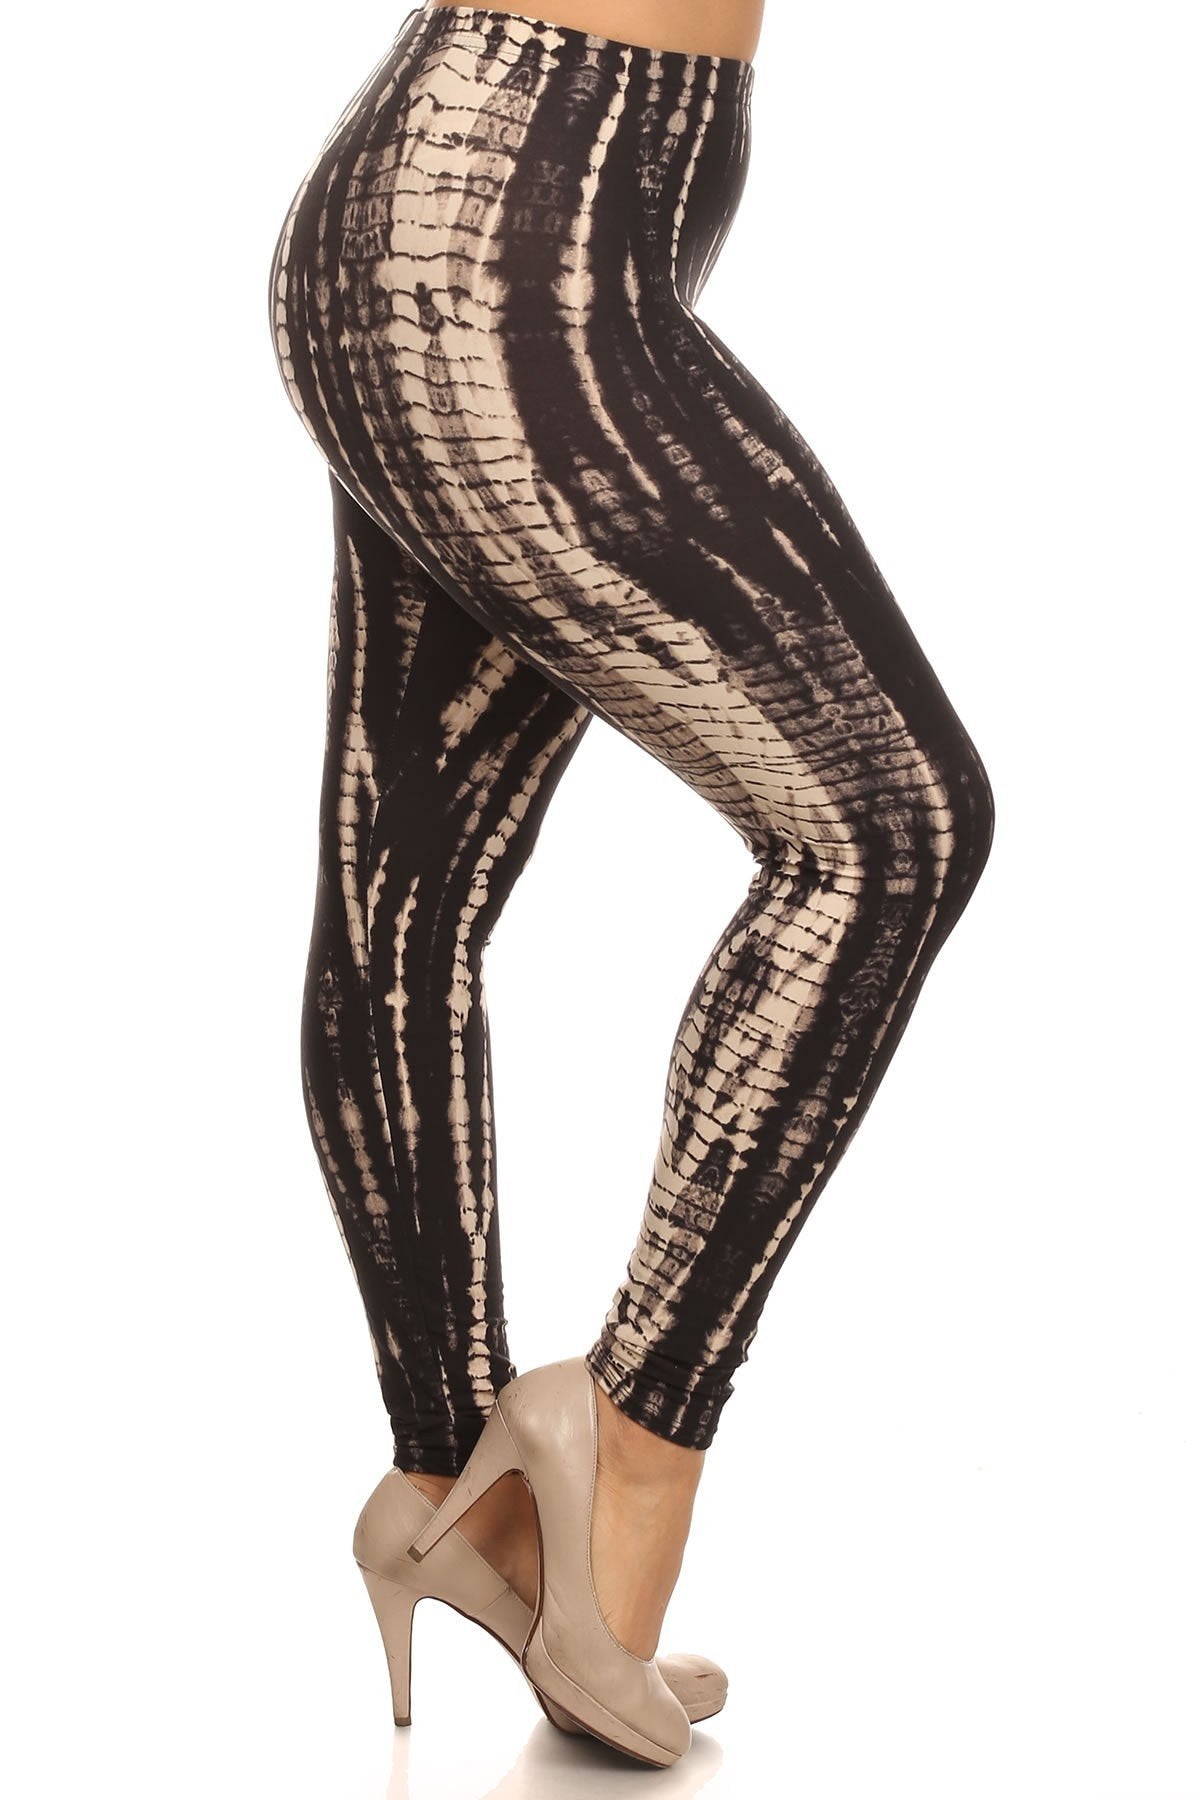 Plus Size Black And Tan Tie Dye Print Full Length Fitted Leggings With High Waist. - LOLA LUXE